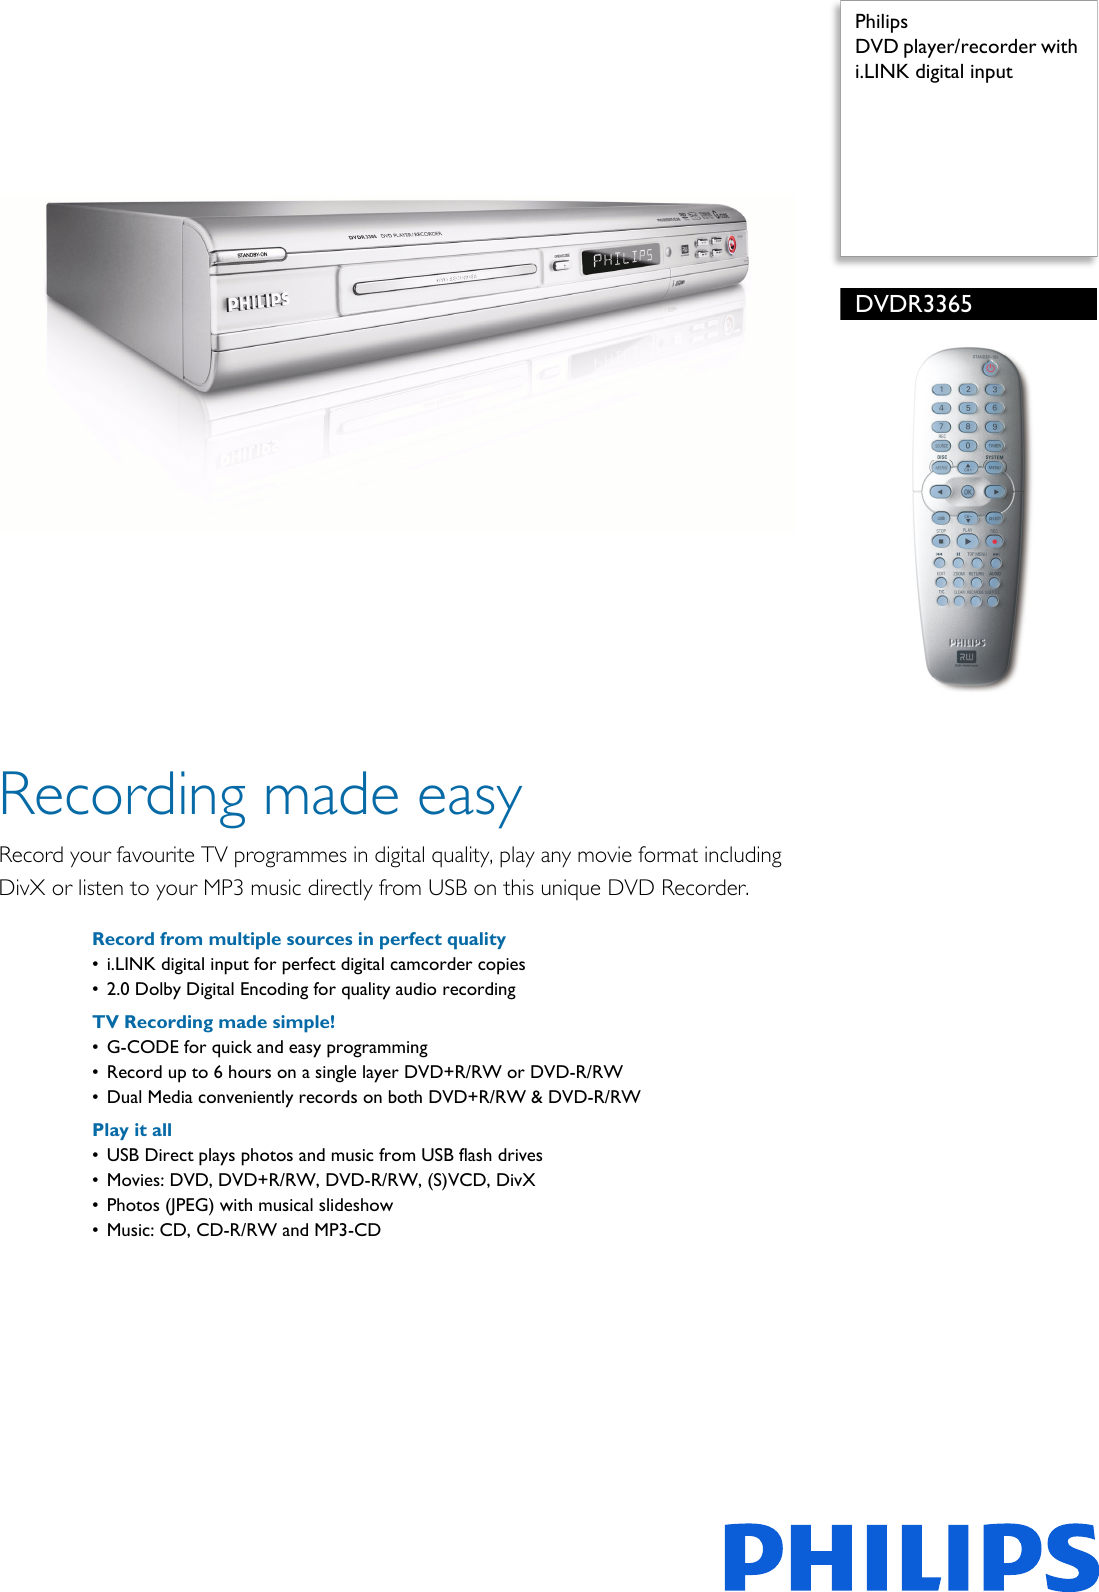 Page 1 of 2 - Philips DVDR3365/75 DVD Player/recorder With I.LINK Digital Input Leaflet Dvdr3365 75 Pss